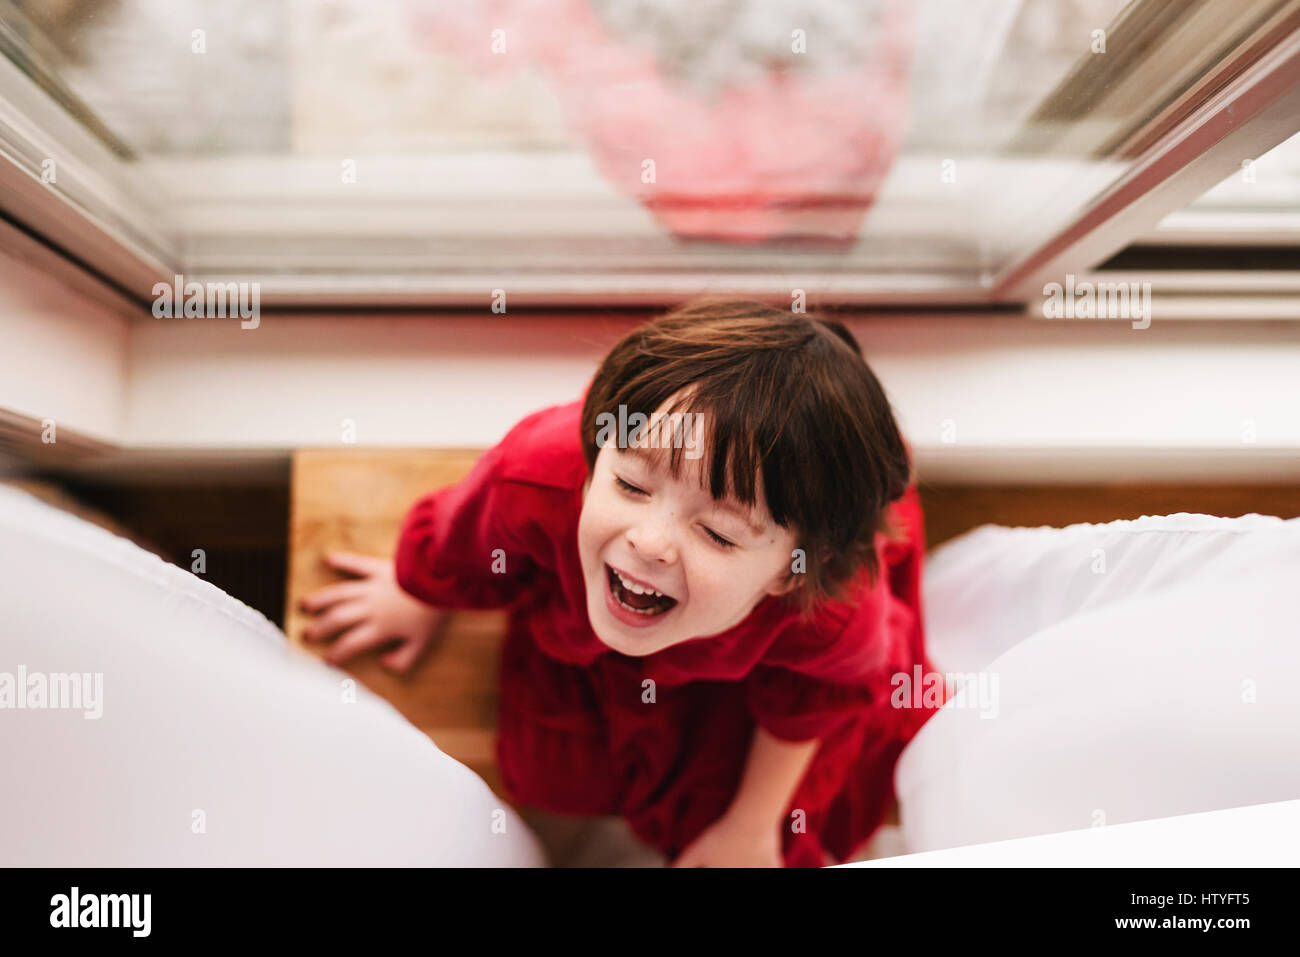 Overhead view of girl sitting by a curtain laughing Stock Photo